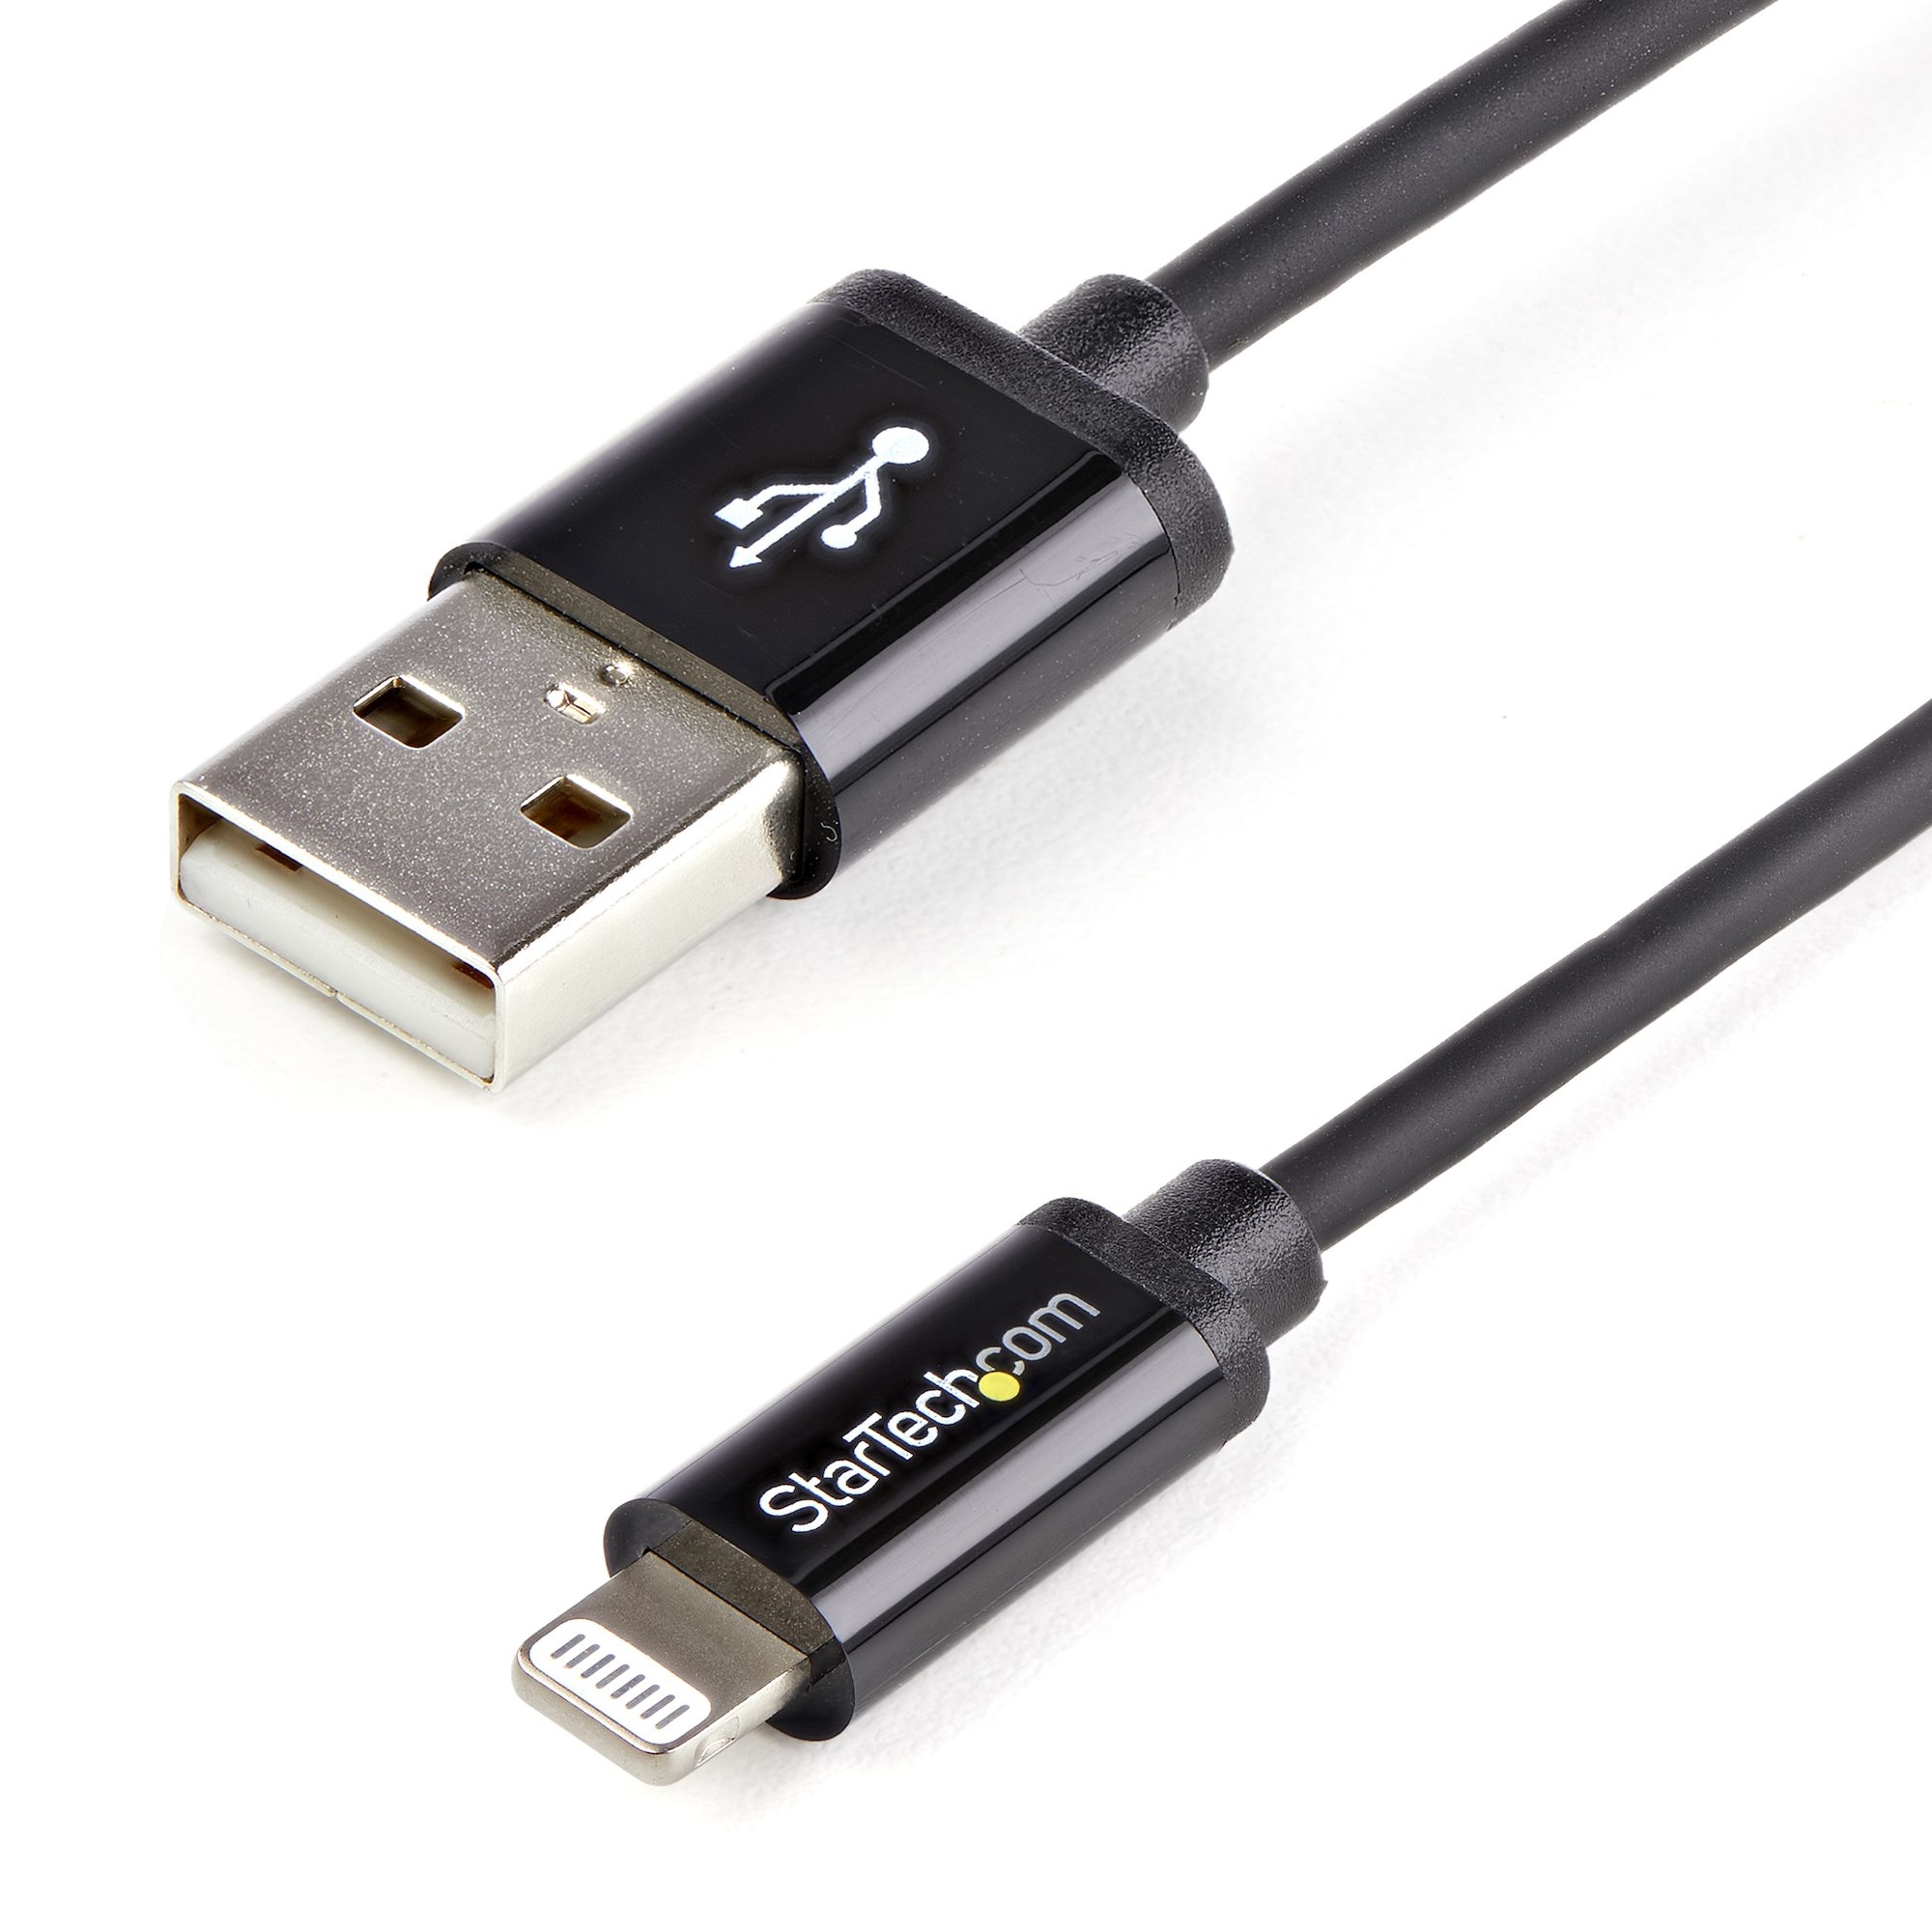 StarTech 8-pin Lightning to USB Cable (Black, 1m)